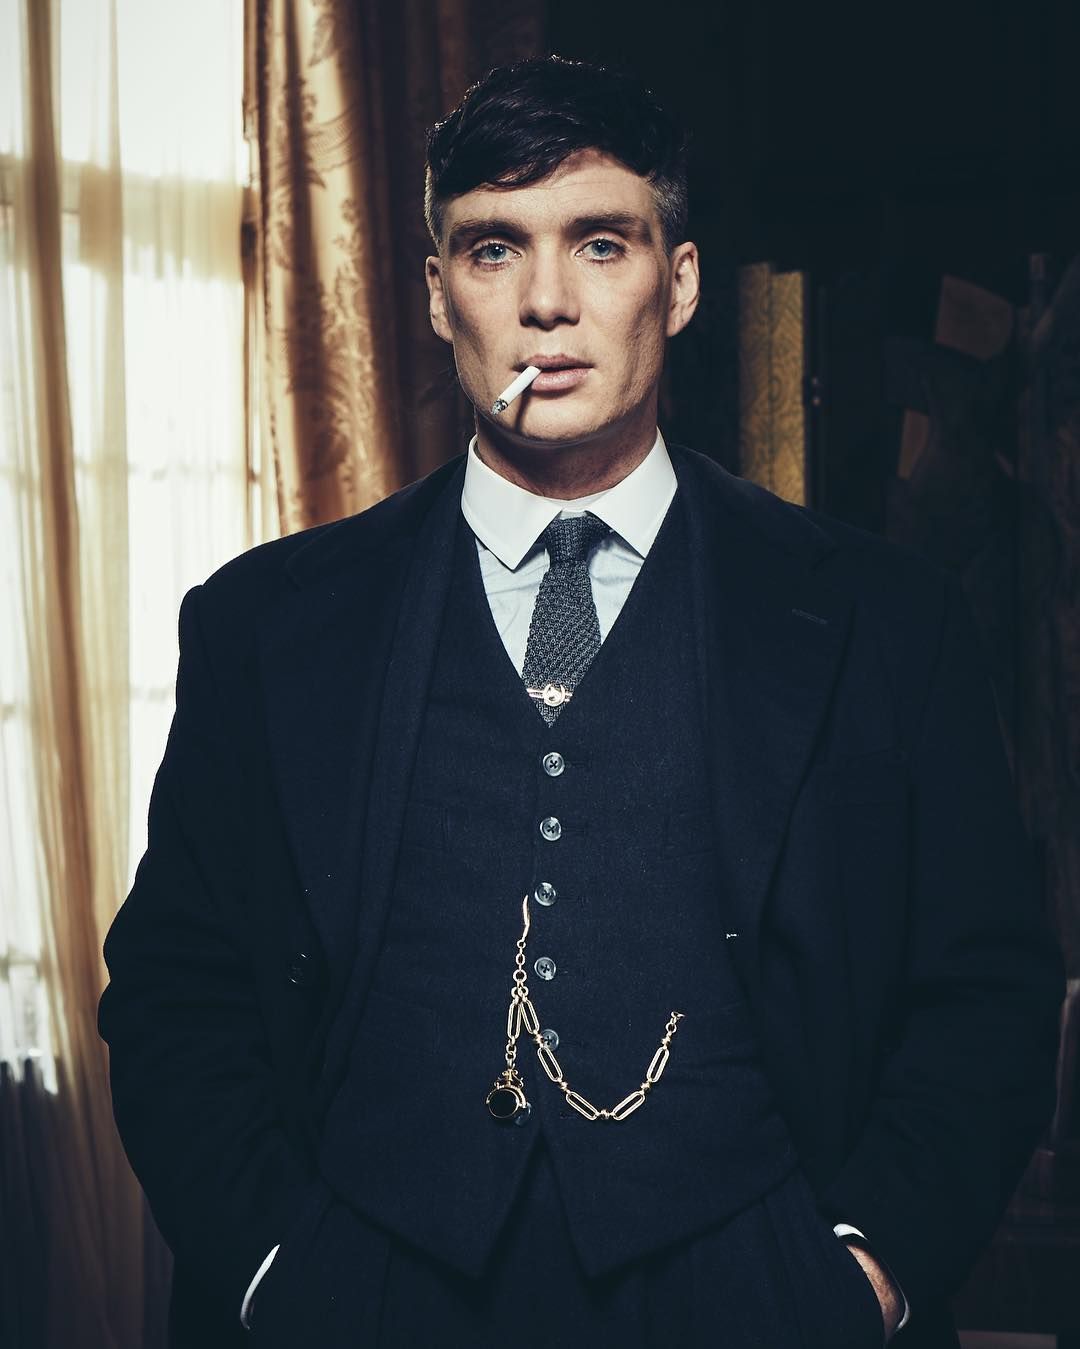 A6 By order of the Peaky Blinders Tommy Shelby Personalised Peaky Blinders Card Birthday Cillian Murphy